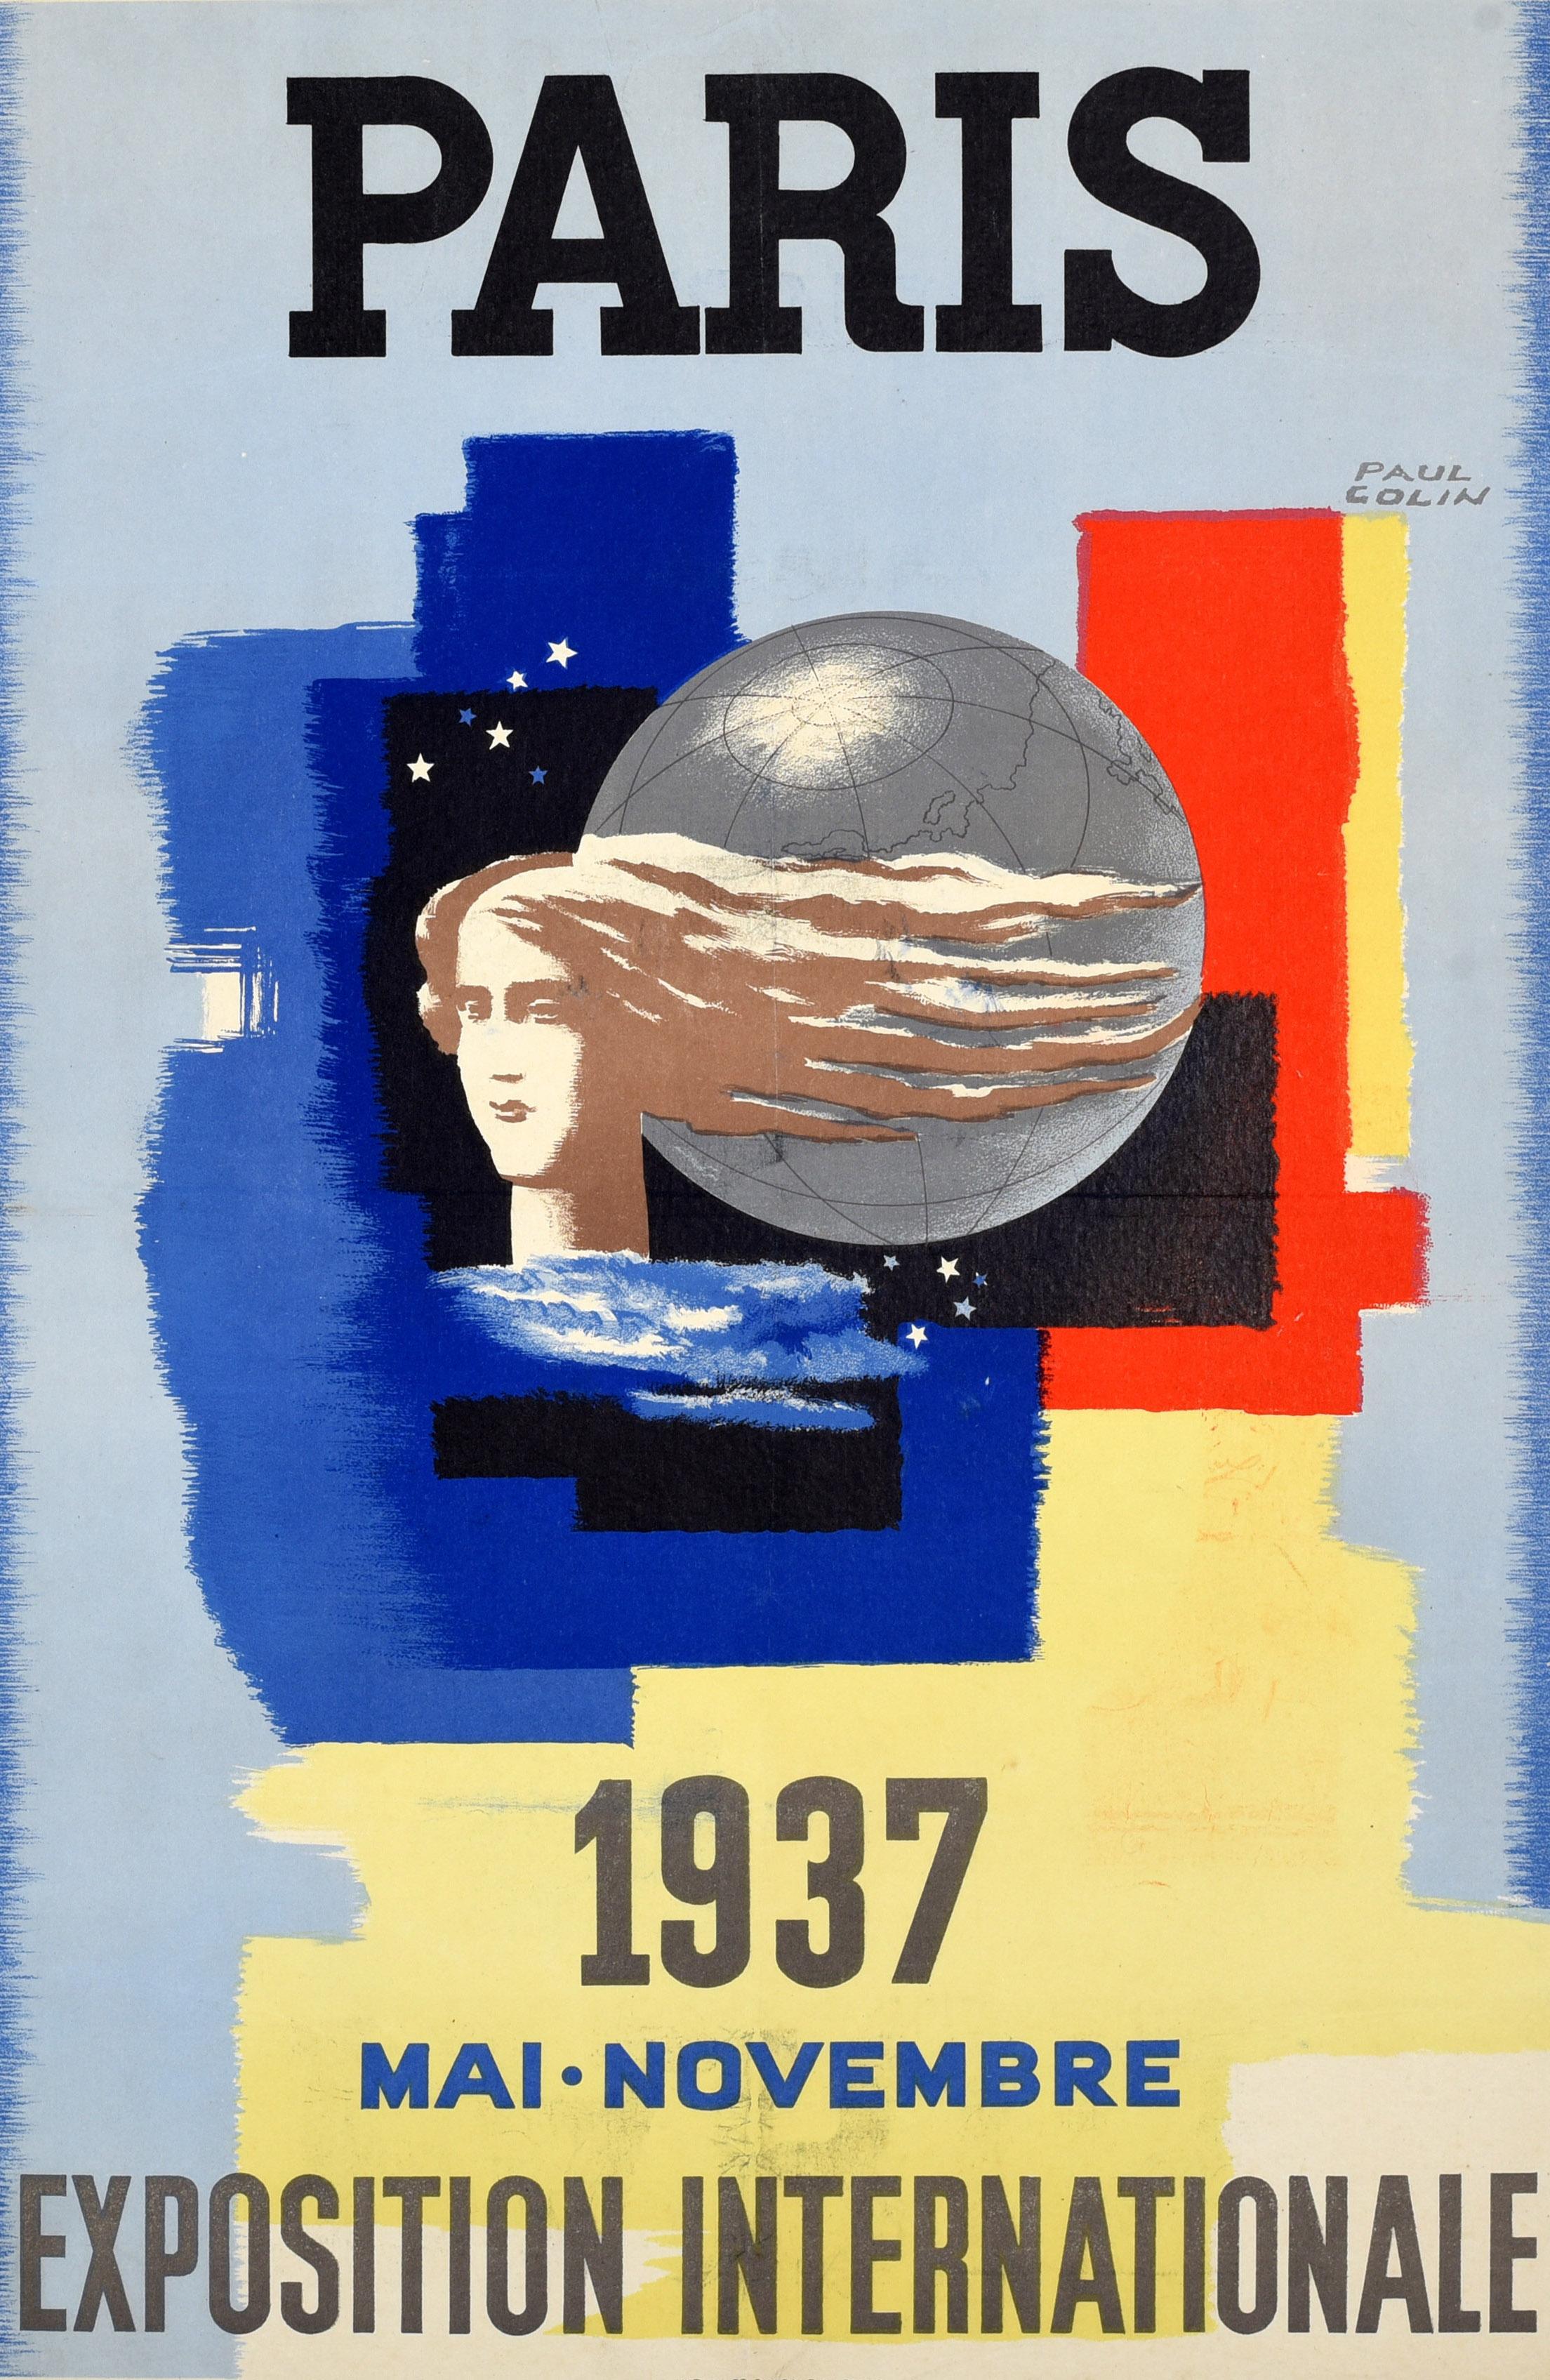 Original vintage advertising poster for the Paris 1937 Exposition Internationale / International Exhibition held from May to November featuring a great design by Paul Colin (1892-1985) depicting a lady with her hair blowing in the wind around a